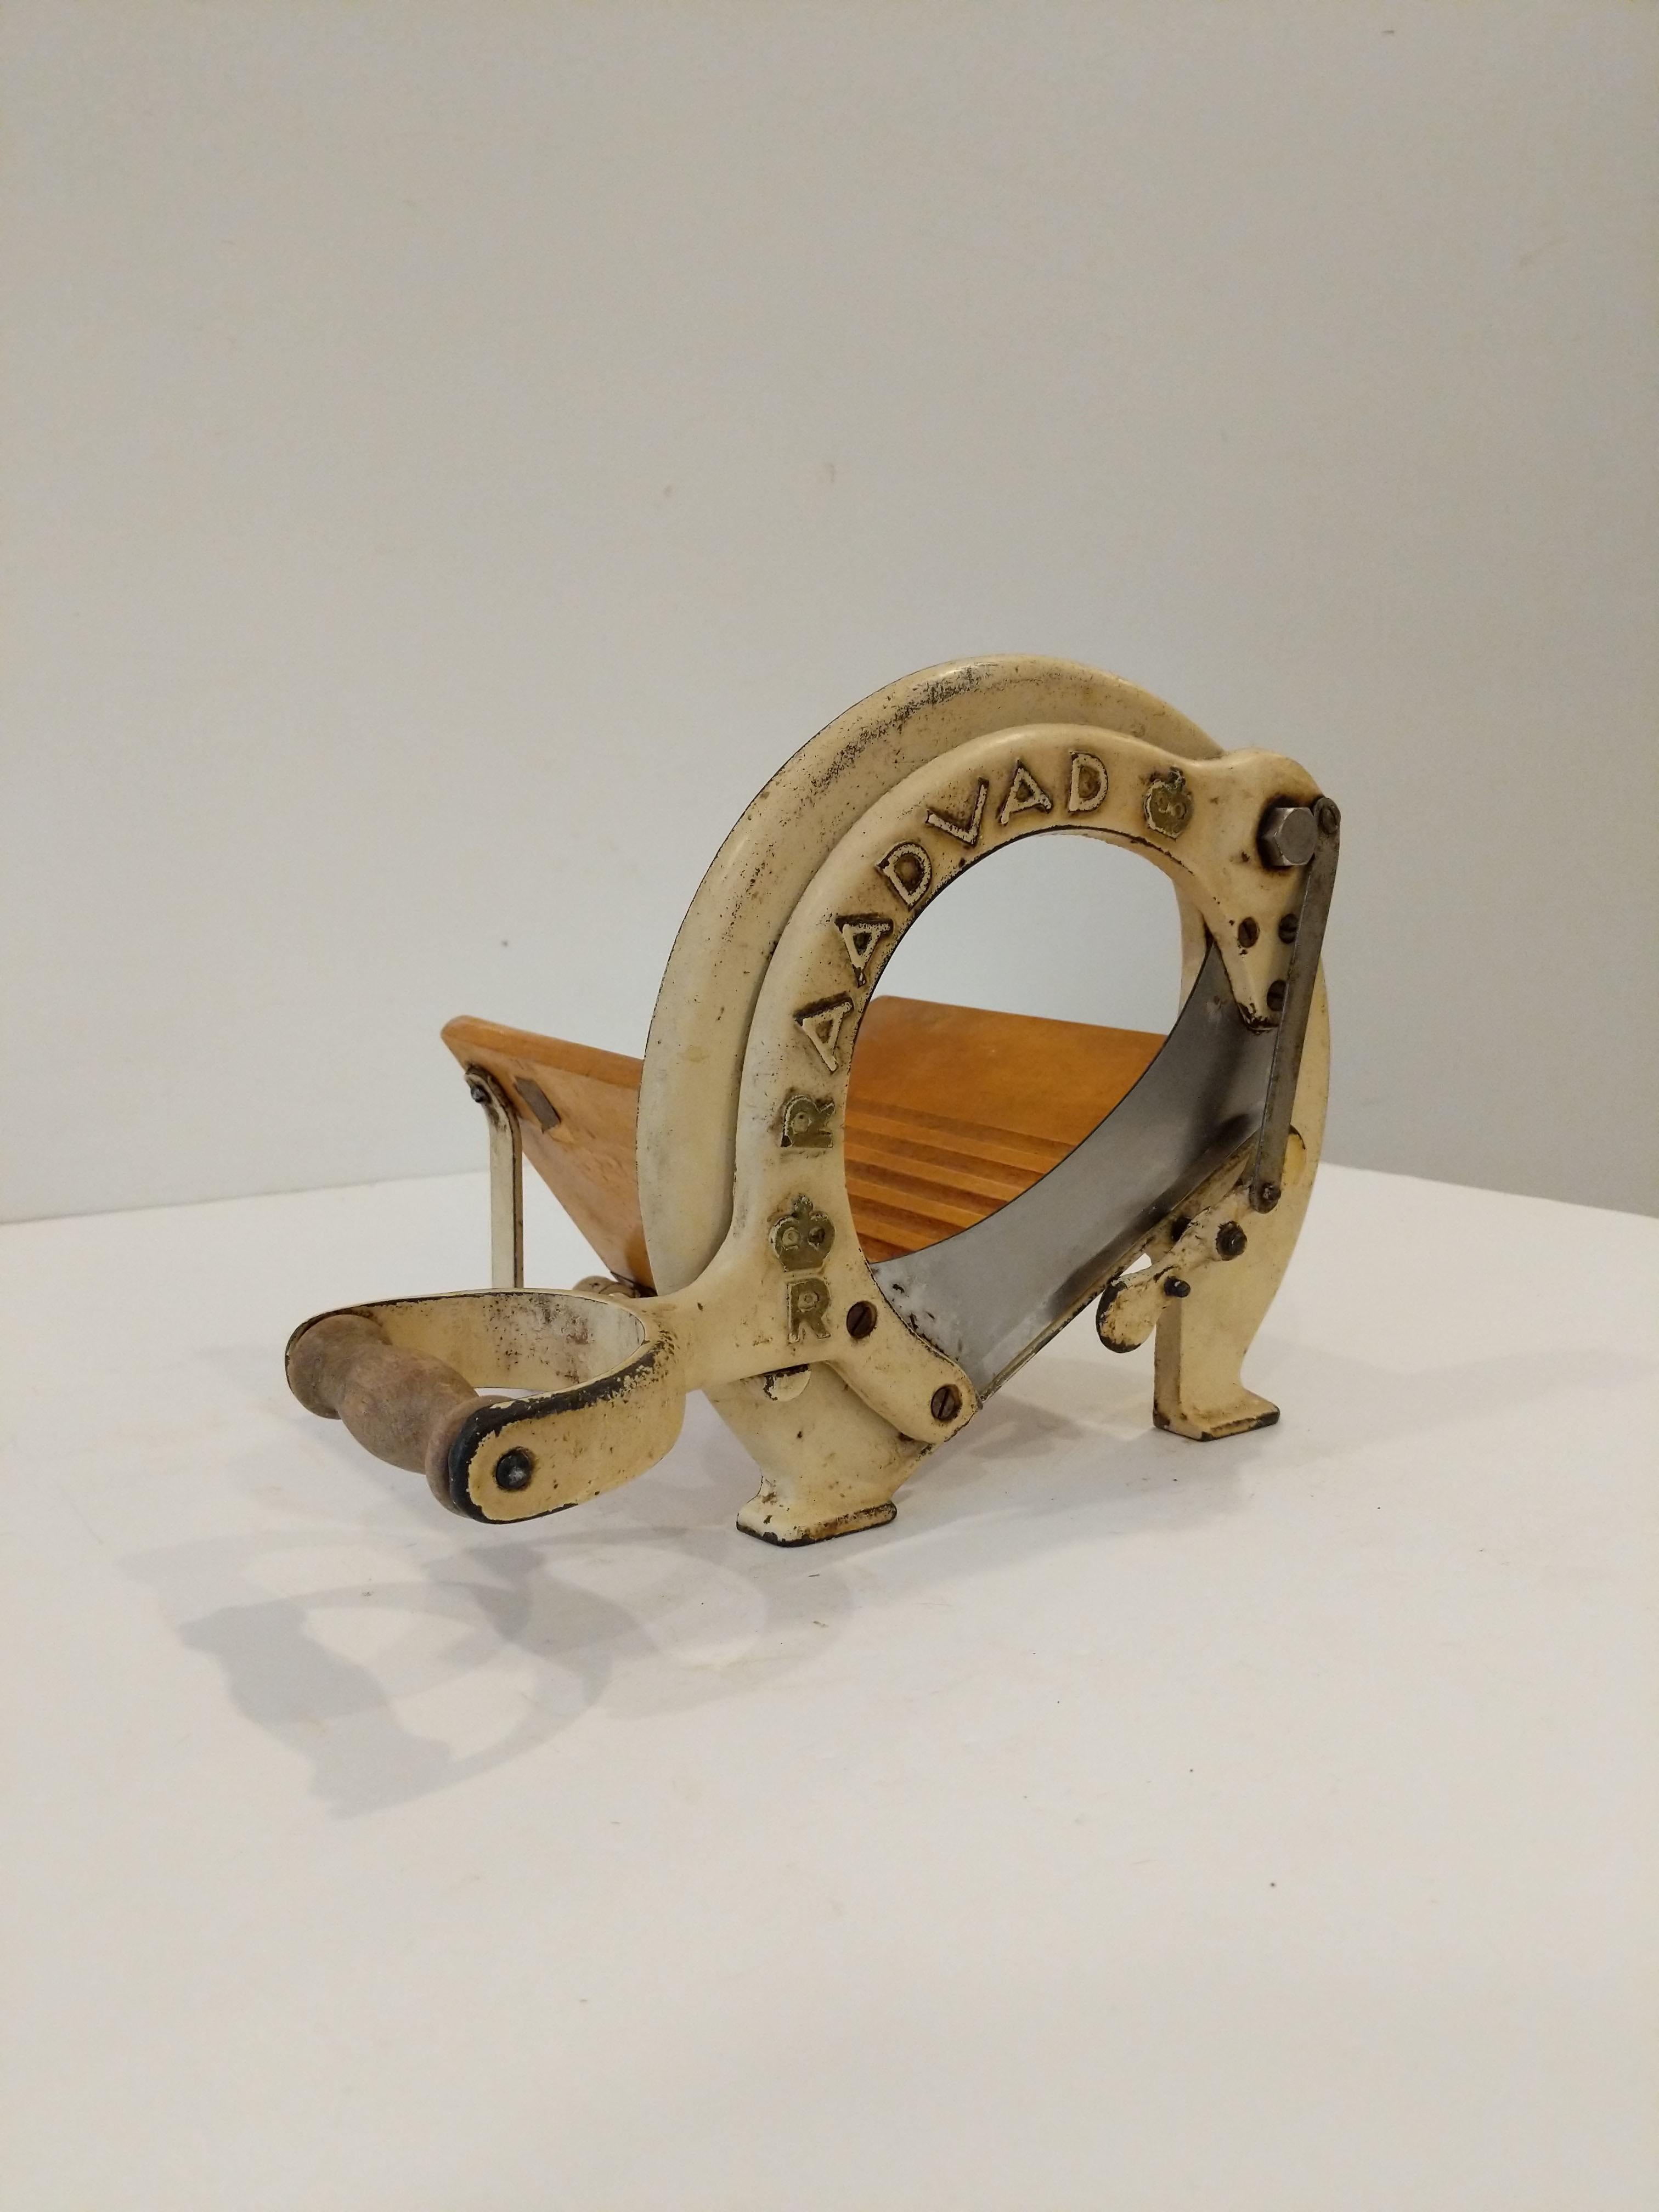 Authentic vintage Danish bread slicer / guillotine in cream.

Model 294 by Raadvad.

This slicer is in good condition overall and expectedly shows its age a bit.

Dimensions:
13.5” Long including handle
9.5” Tall
8” Wide

Ref: RV27-033